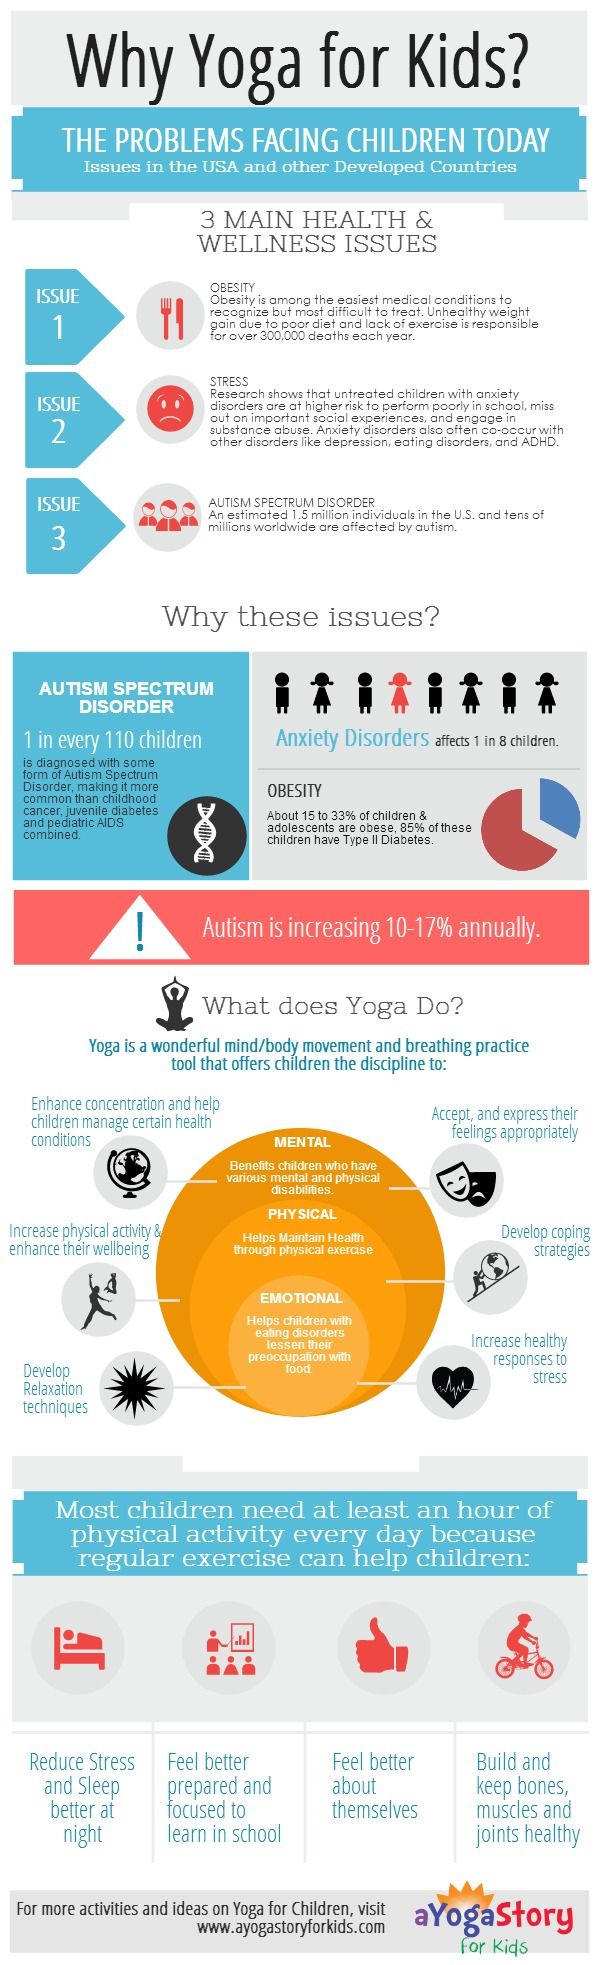 Why Yoga for Kids? Infographic